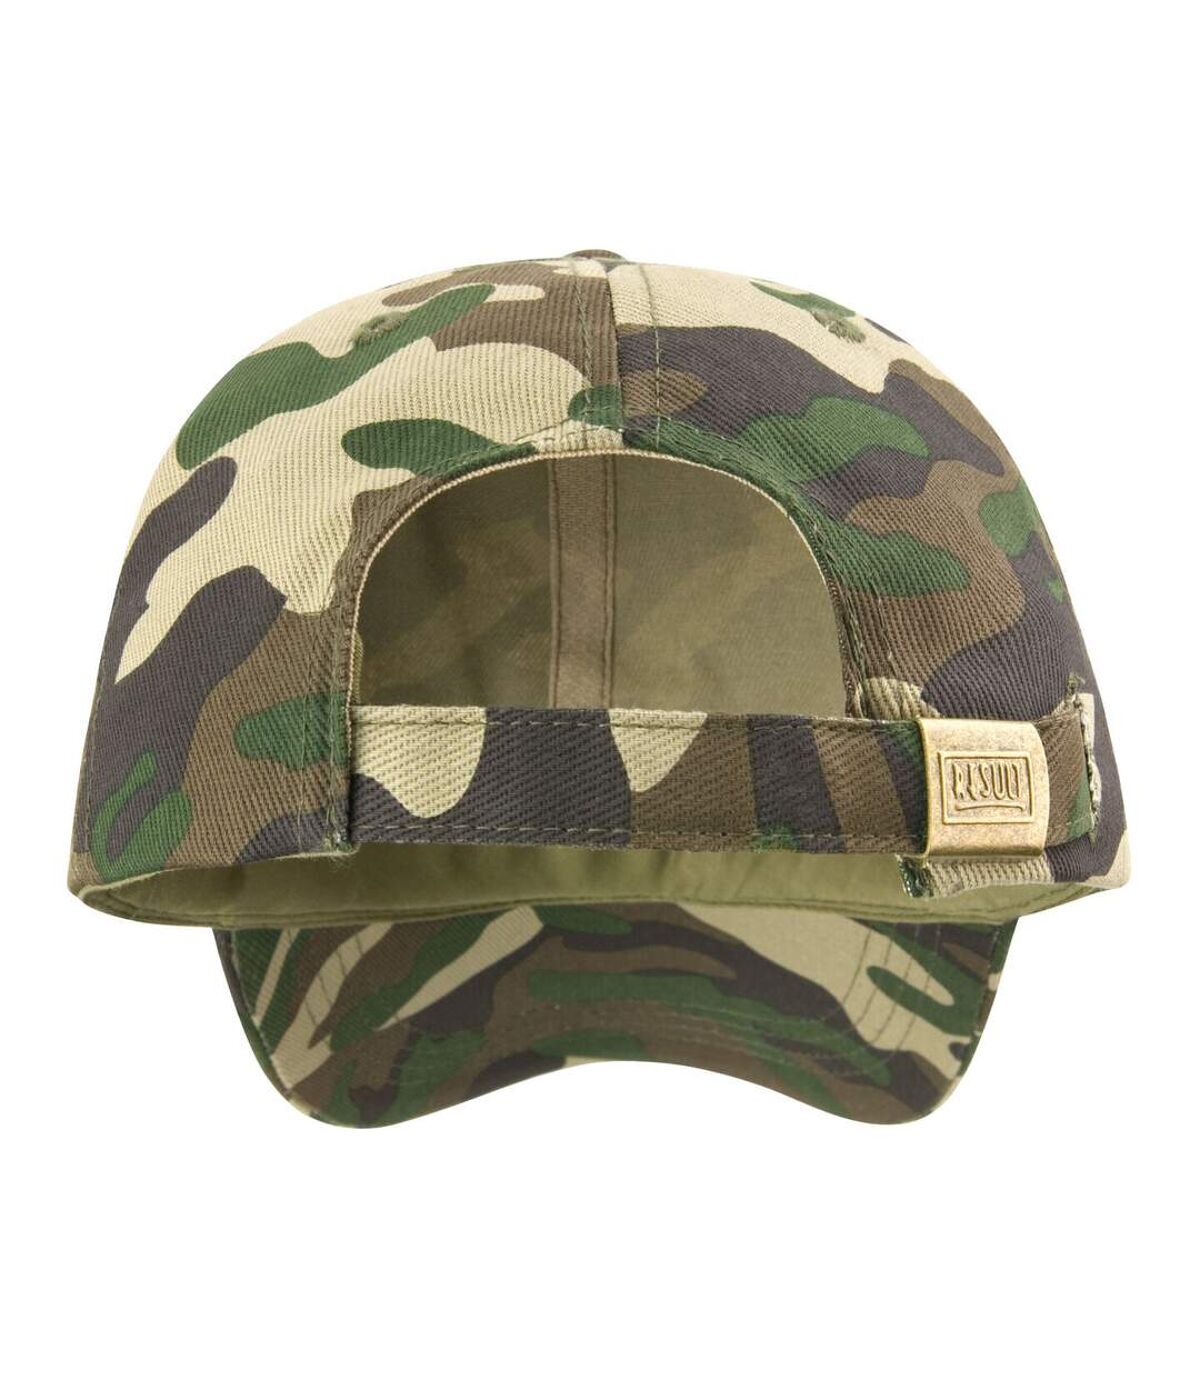 Result - Casquette unie style pro - Adulte unisexe (Camouflage) - UTBC958